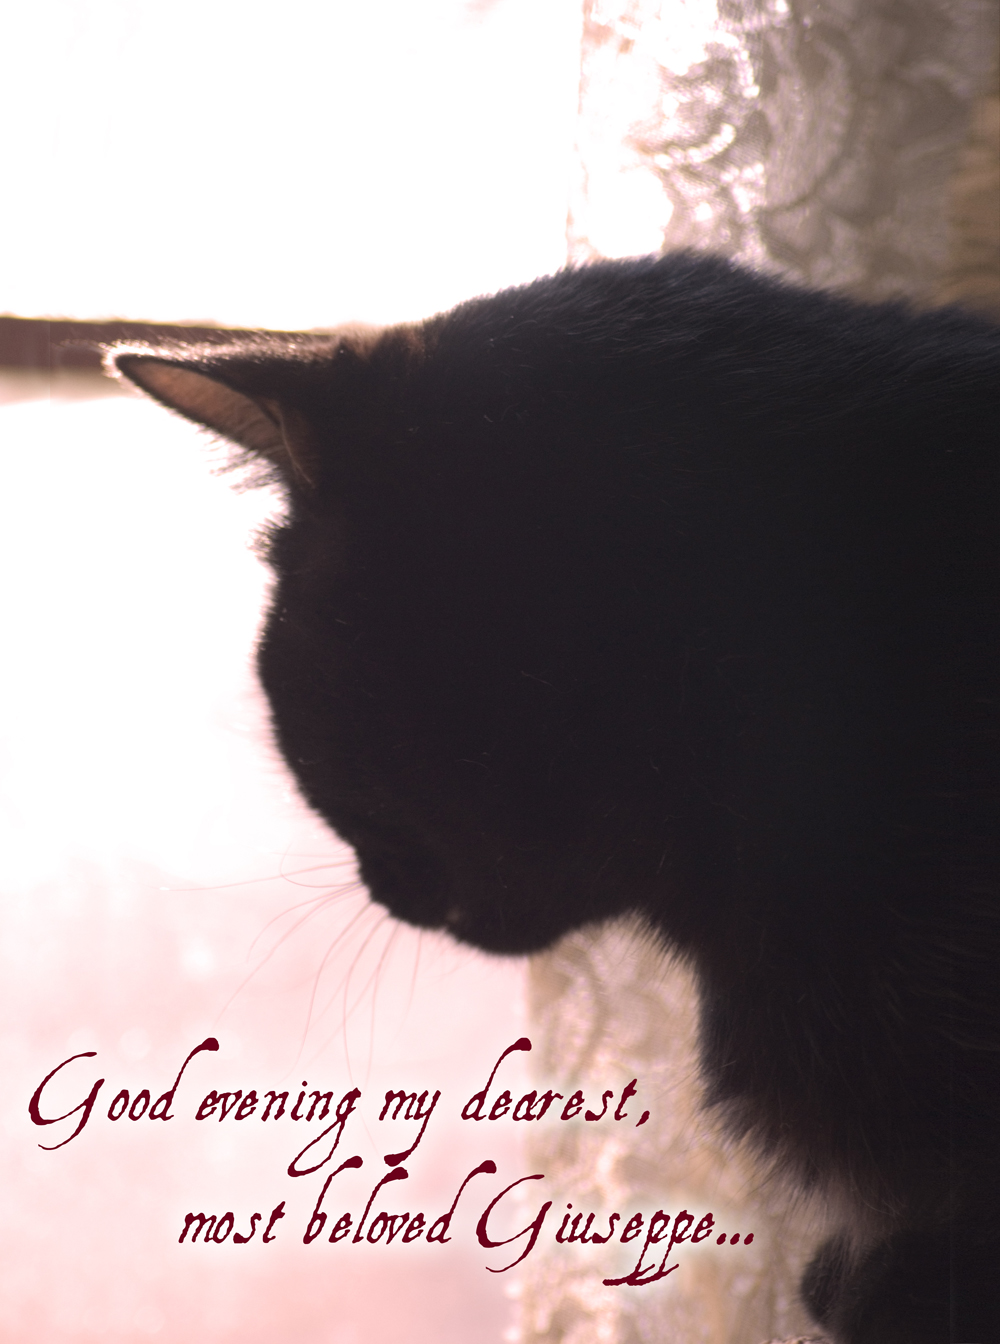 black cat looking out window with text